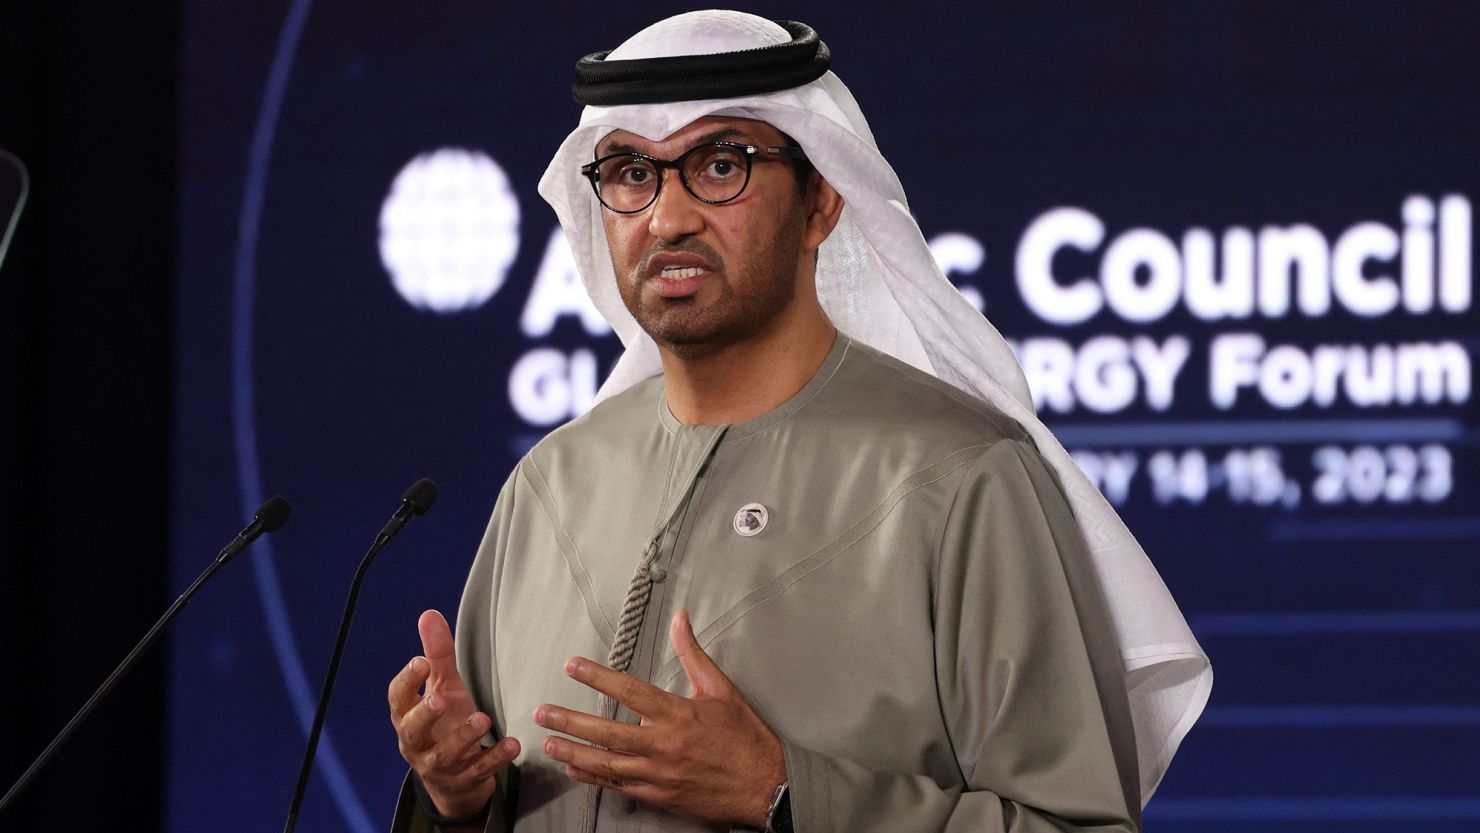 United Arab Emirates' Minister of State, climate envoy and CEO of the Abu Dhabi National Oil Company (ADNOC), Sultan Al Jaber, addresses the public at the opening session of the Atlantic Council Global Energy Forum, in the capital Abu Dhabi, on January 14. 